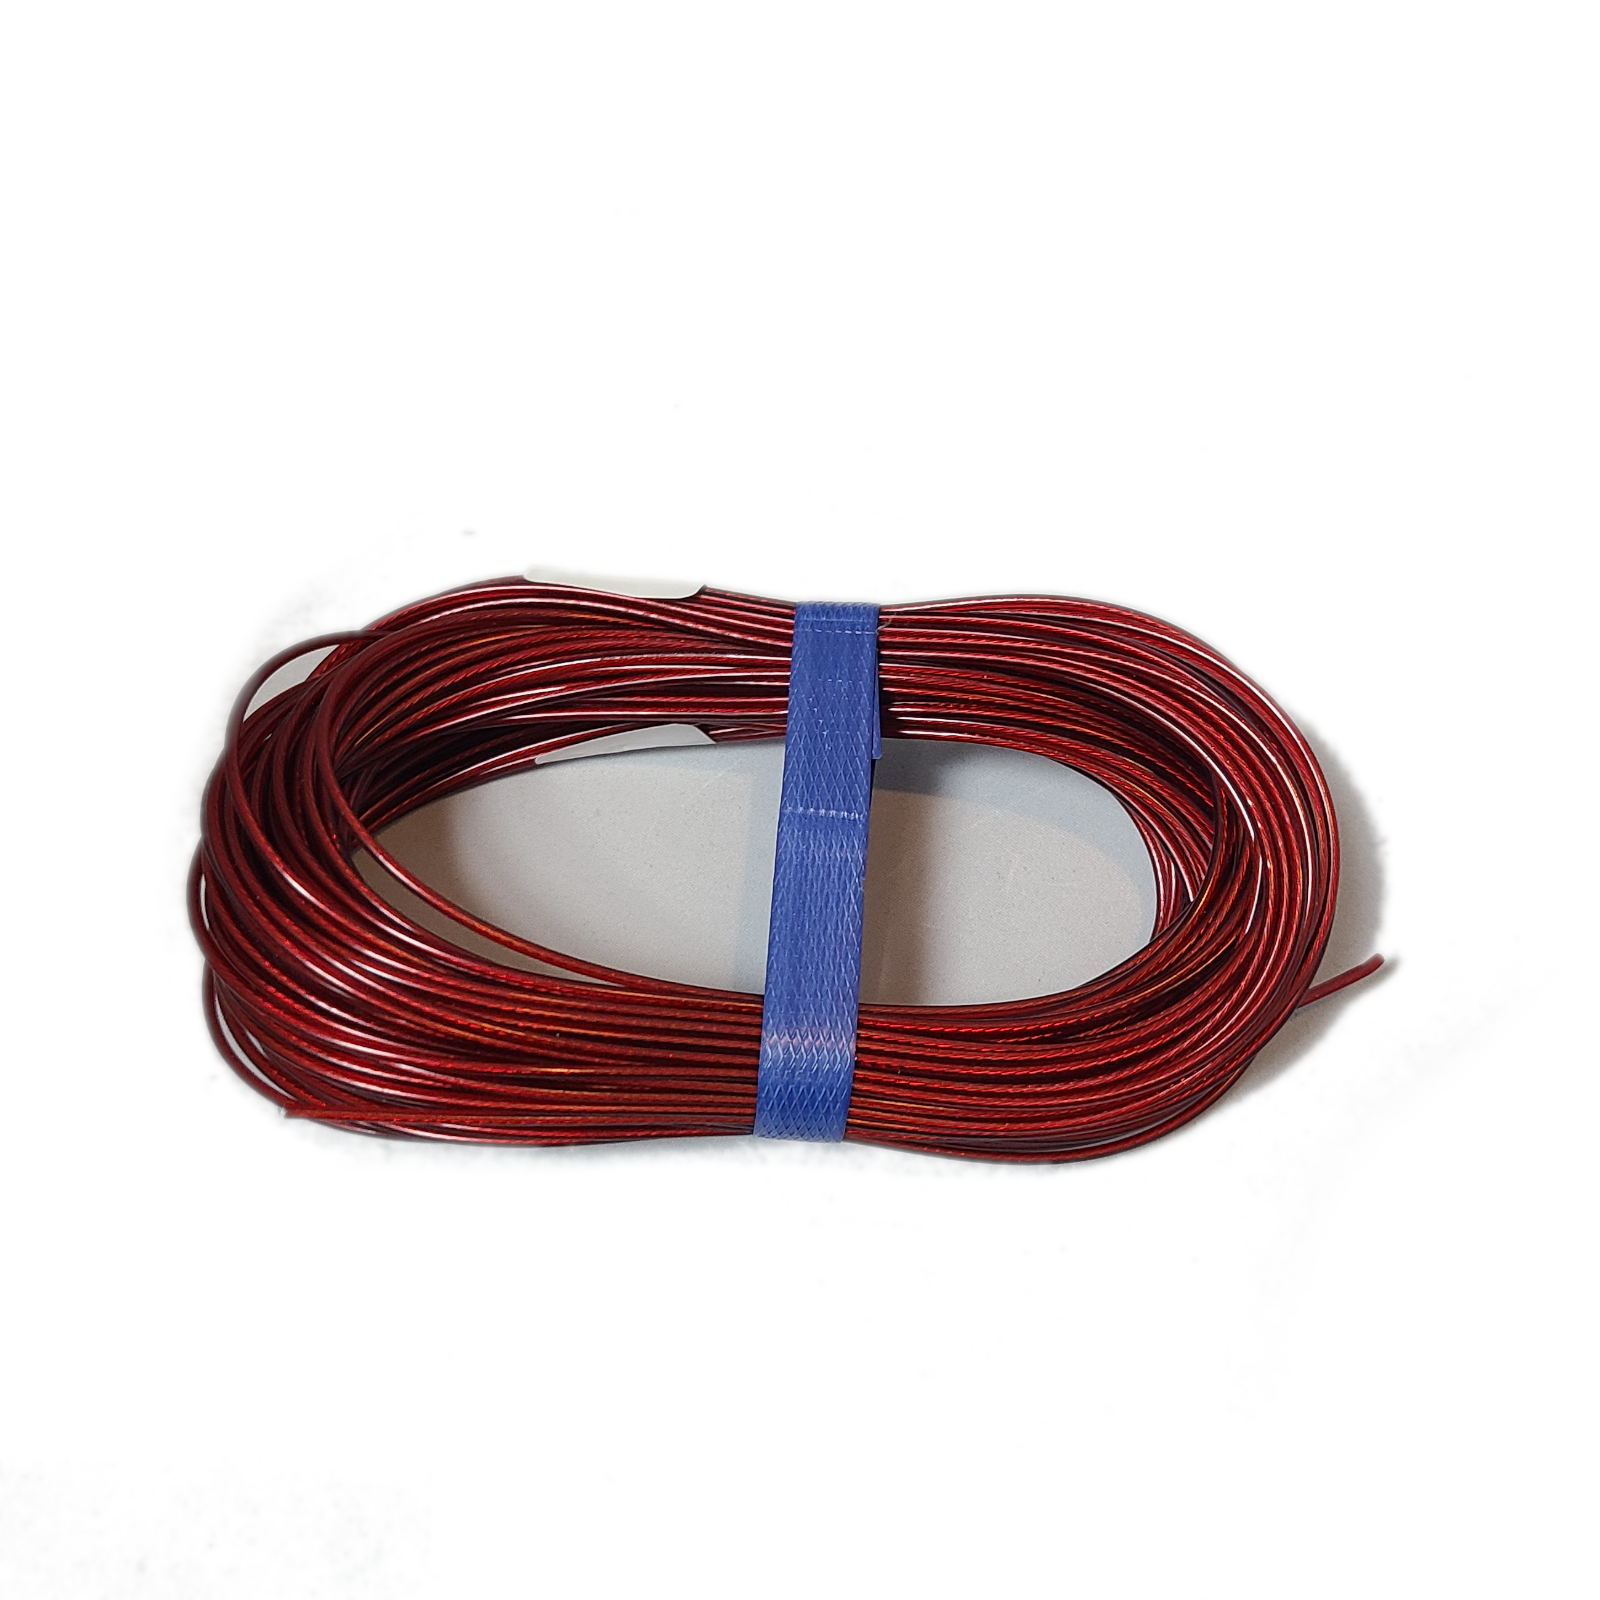 100ft Vinyl Cover Cable